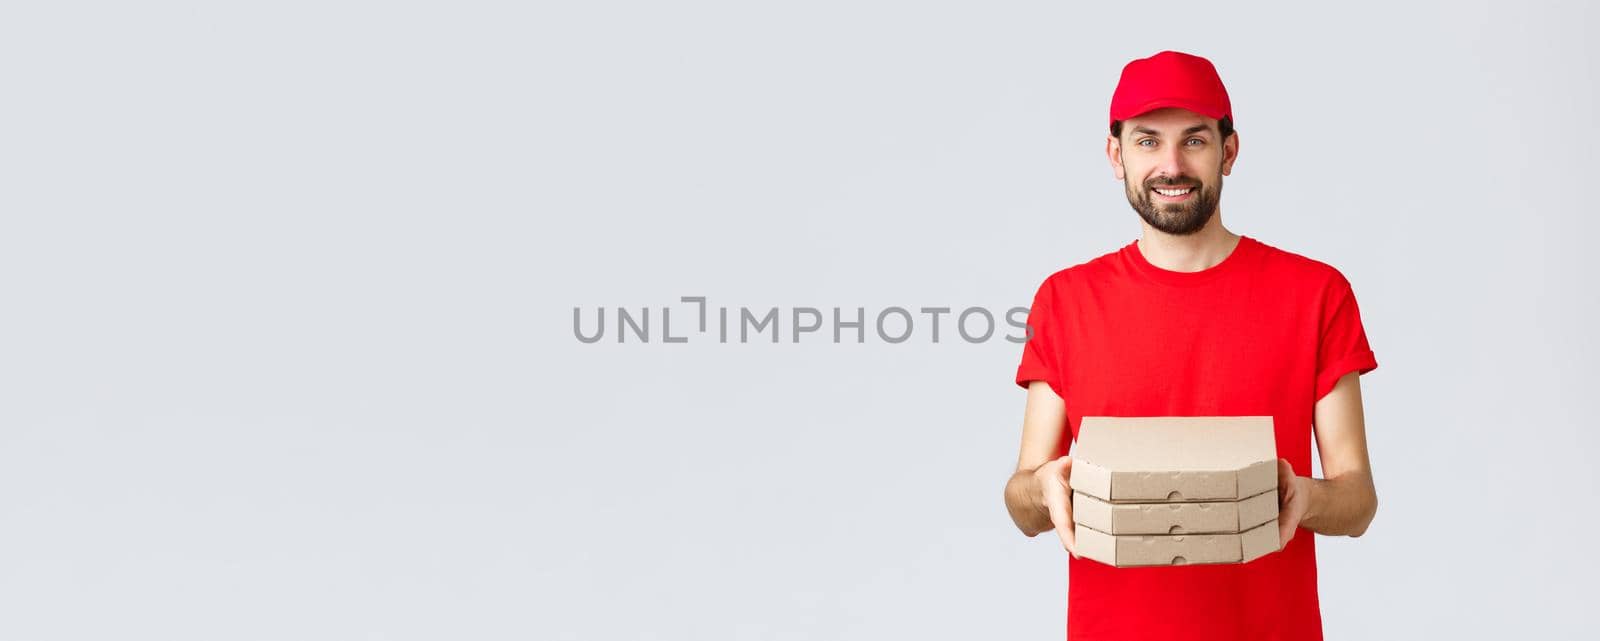 Food delivery, quarantine, stay home and order online concept. Smiling nice bearded courier in red uniform cap and t-shirt, handing clients boxes with pizza, deliver order, grey background.